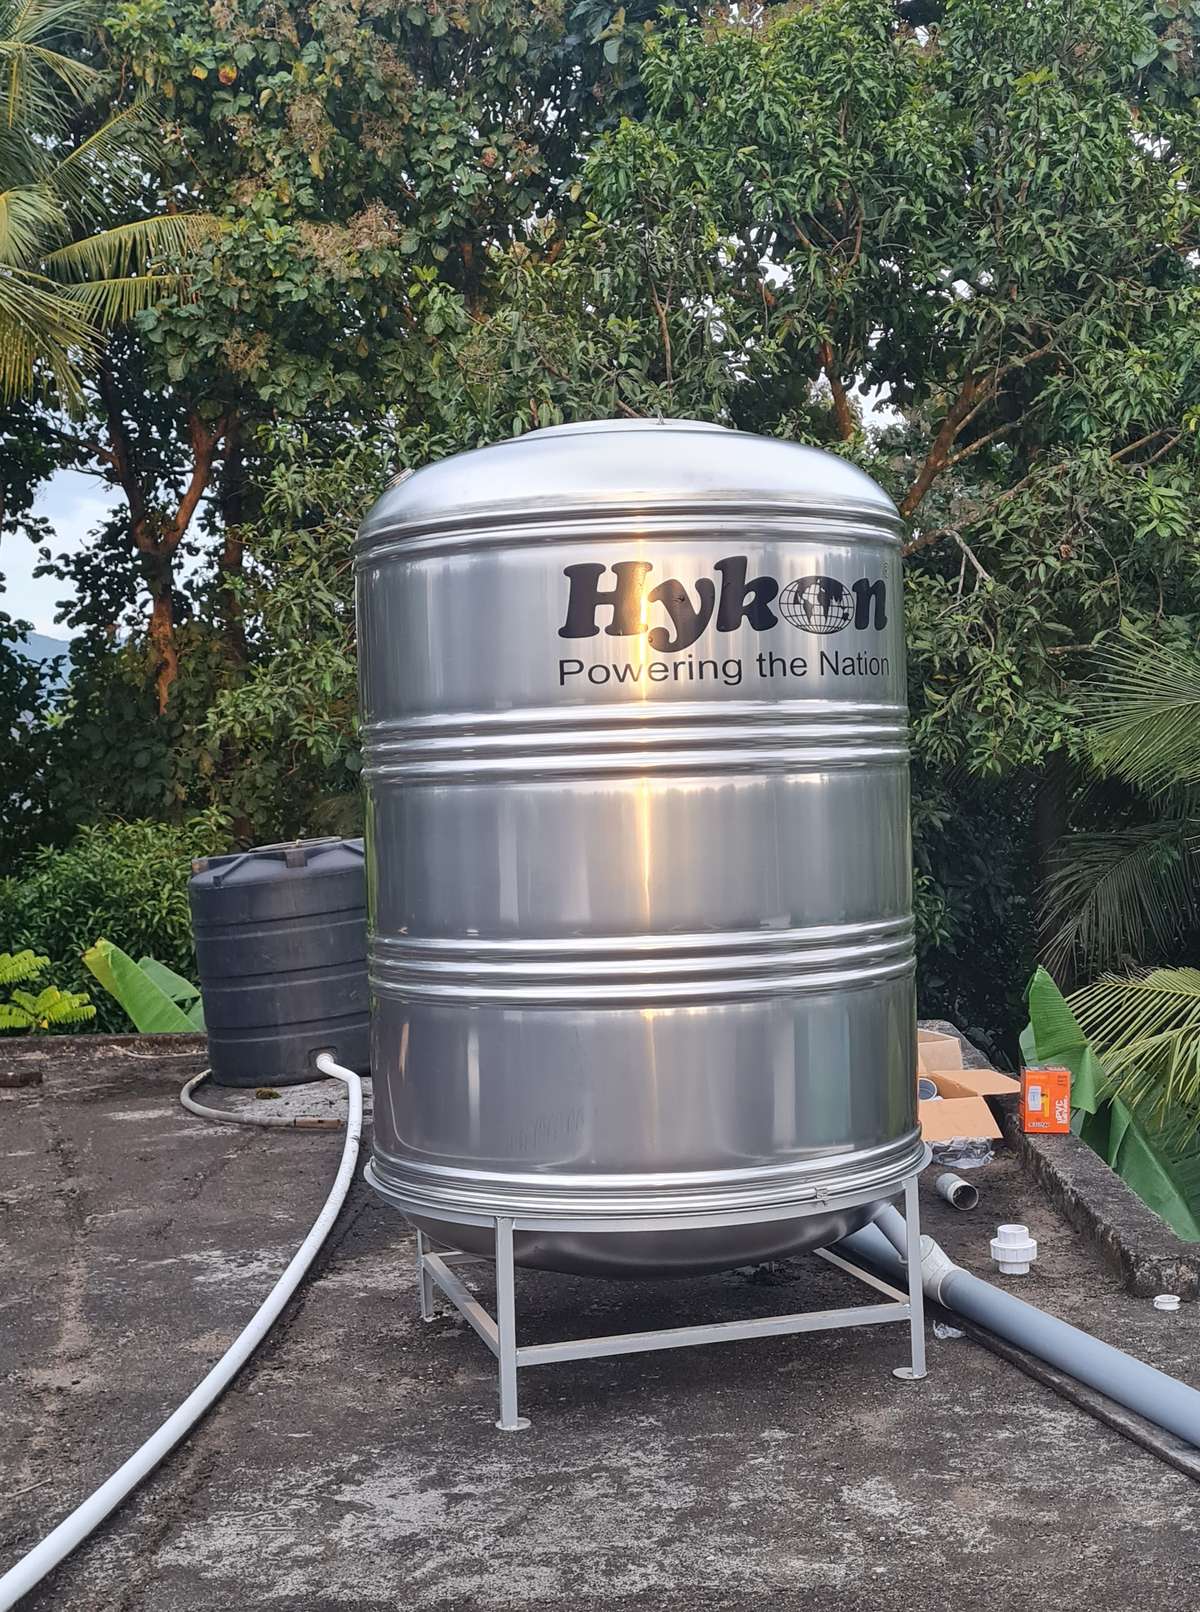 Steel tanks available 

500ltr 1000ltr
1500ltr  2000ltr

Chittilappilly Sanitaries and Electricals
wadakkanchery 
9400734291 
 
 #steeltanks #watertanks 
#watertankstand
#stainlesssteeltanks 